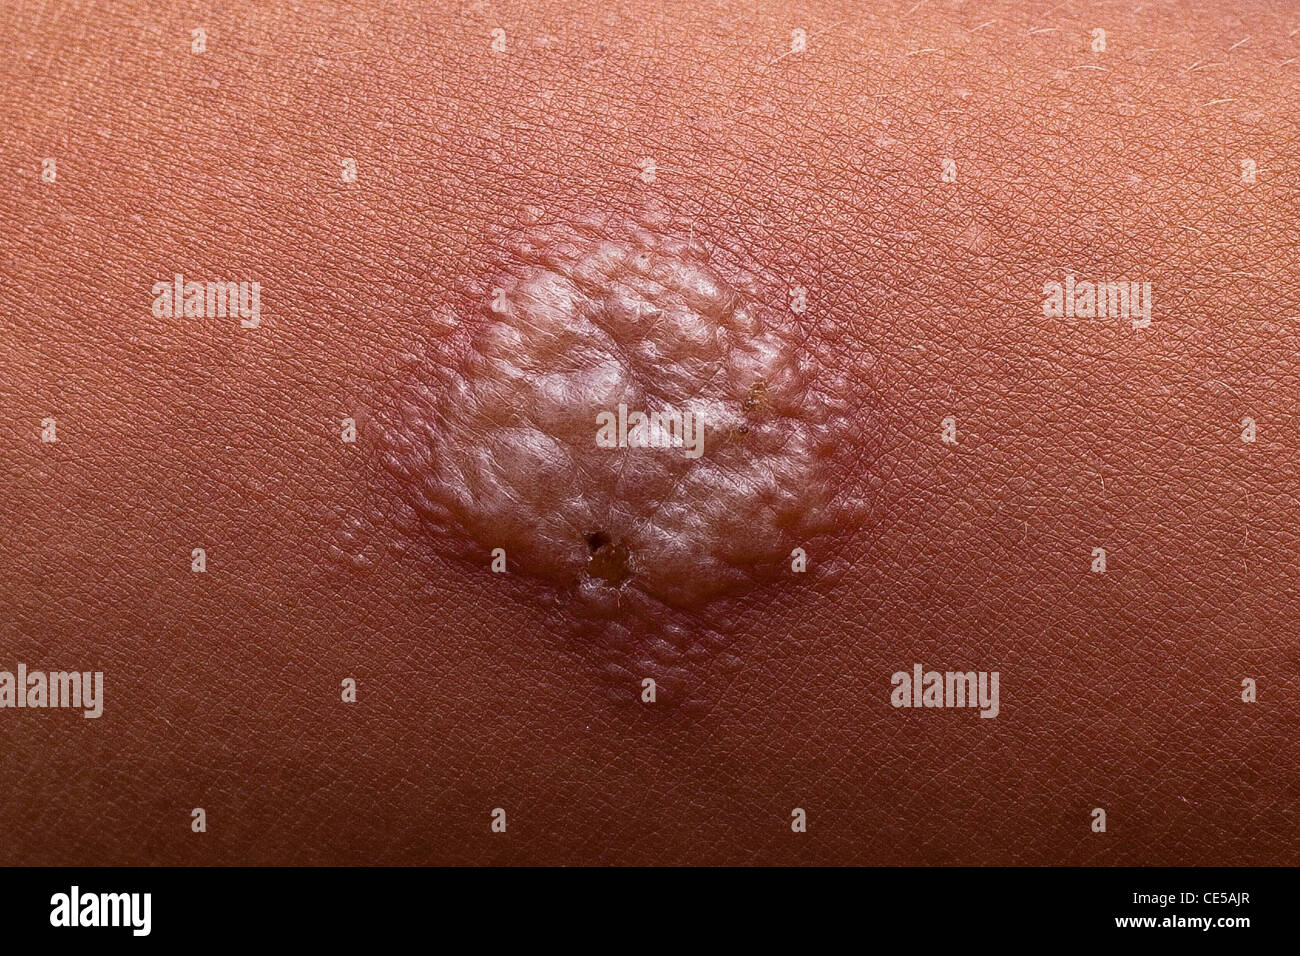 Skin induration detail - the Mantoux test for Tuberculosis involves intradermally injecting PPD (Purified Protein Derivative) tuberculin and measuring the size of induration 48-72 hours later. Mesquita Municipality Tuberculosis Control Program, Rio de Janeiro State, Brazil. Stock Photo